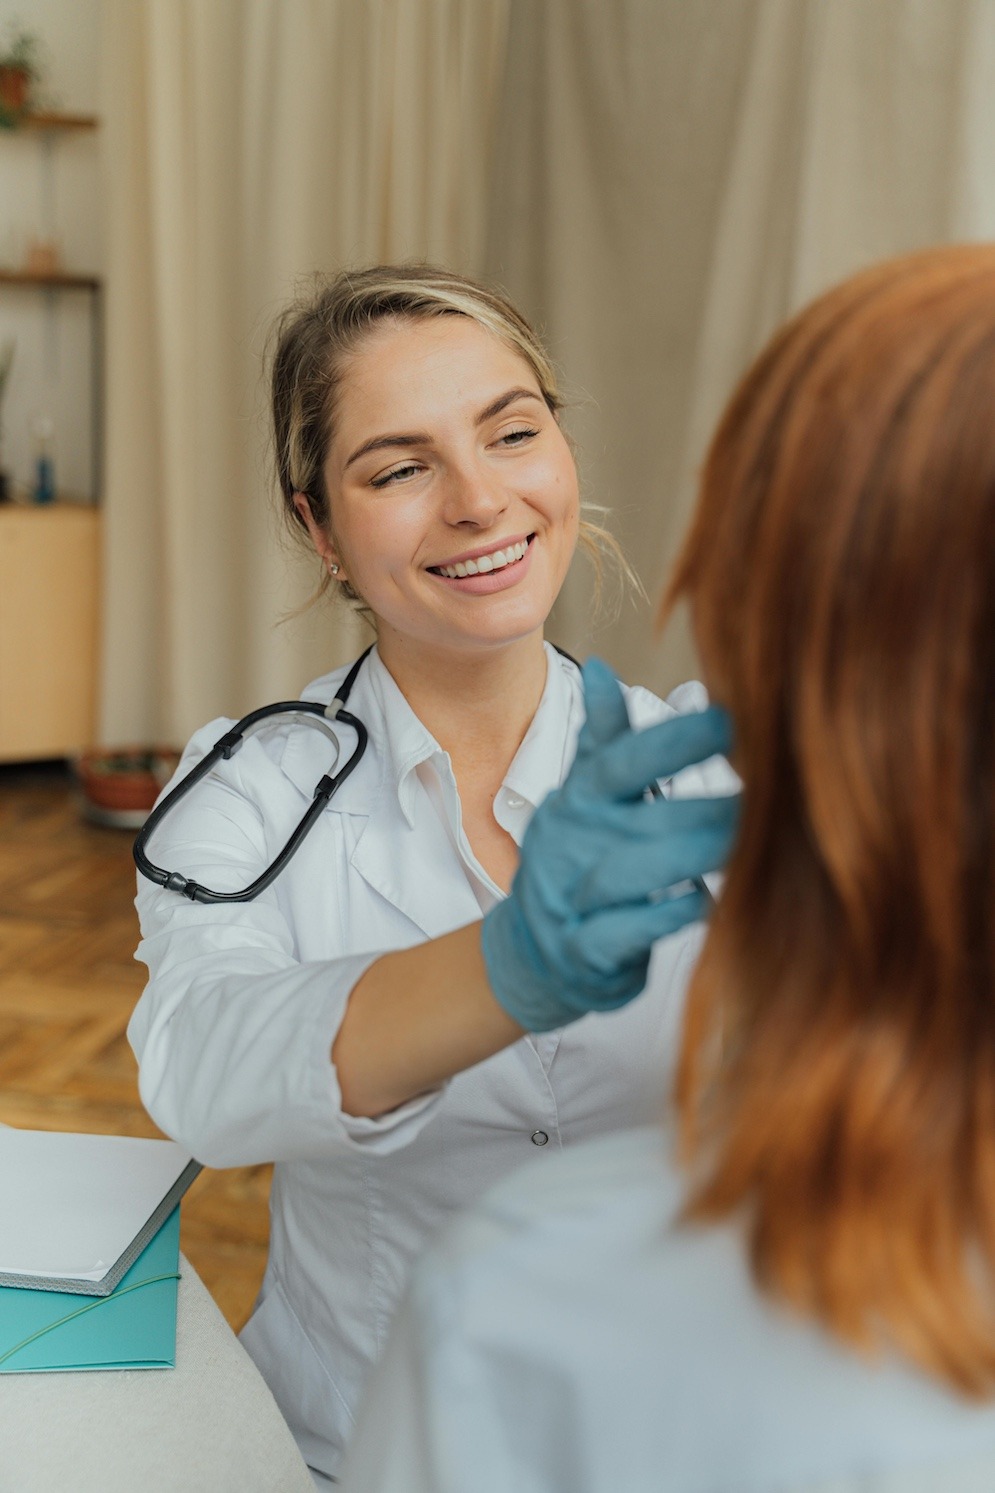 Female doctor smiling, wearing a stethoscope and blue rubber gloves analyzing closely a patients face. The patient's back is to the camera.